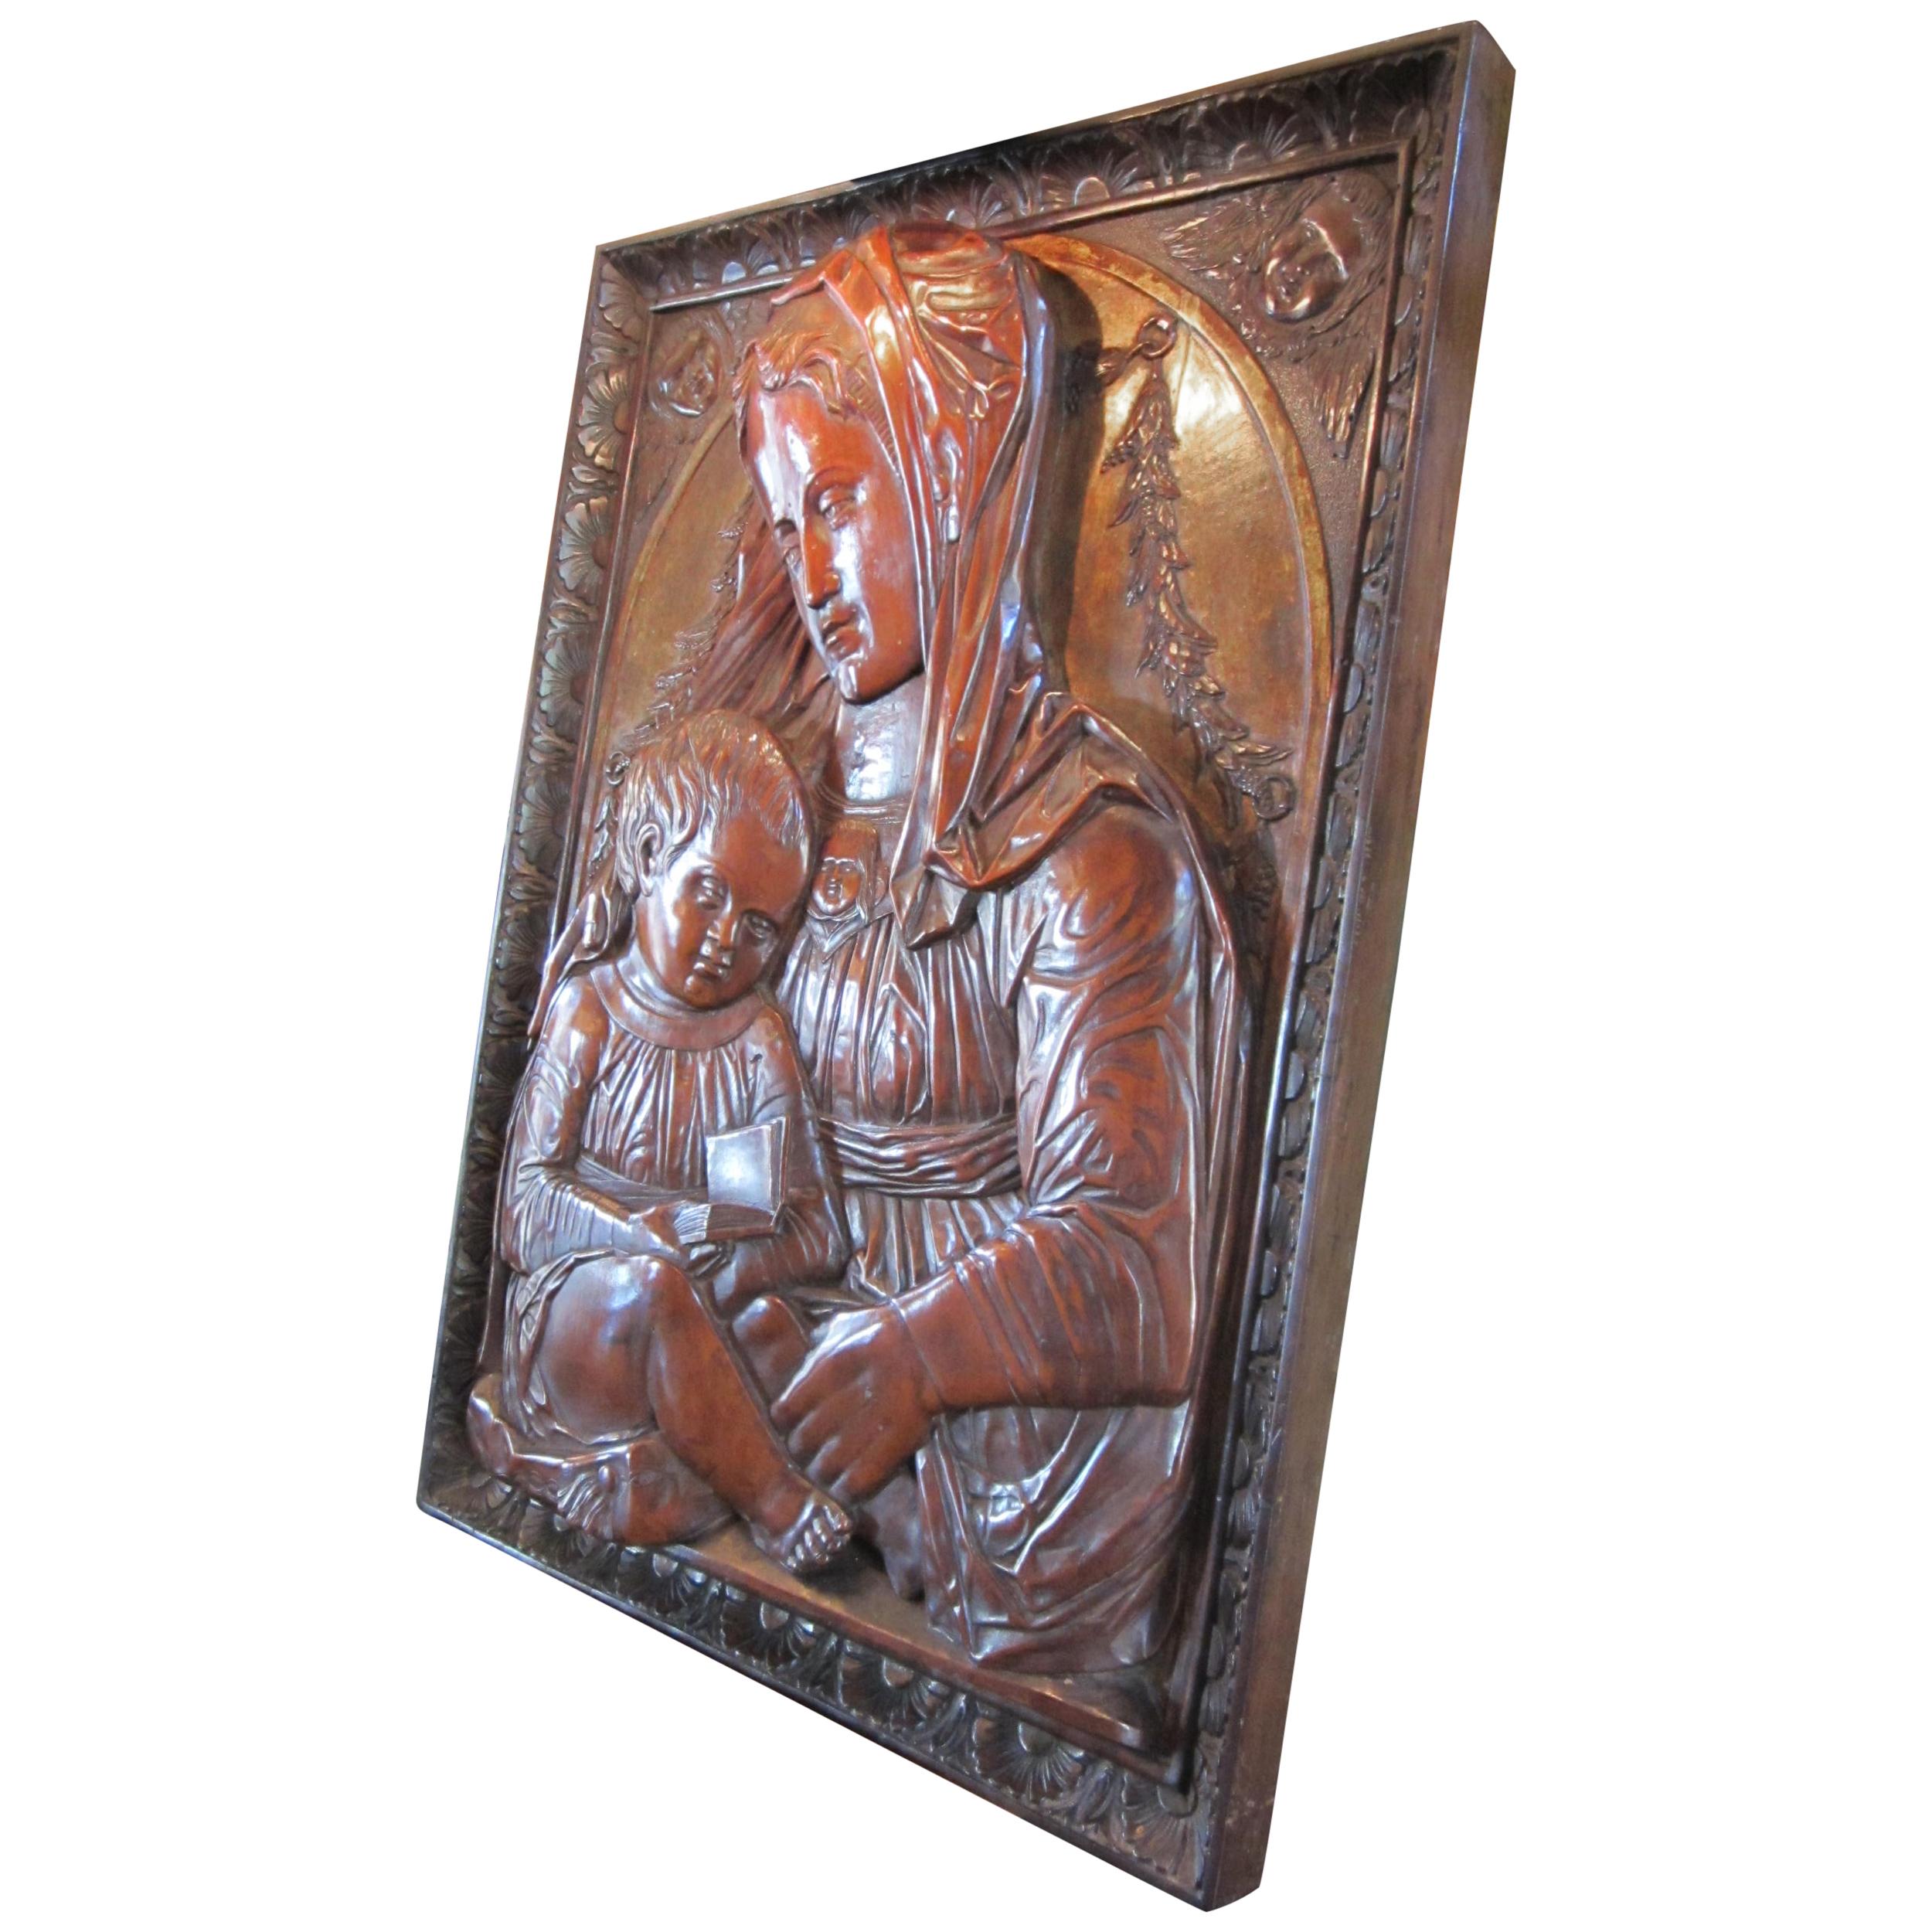 Carved Fruitwood Plaque of Virgin and Child Madonna, after Donatello Sculpture